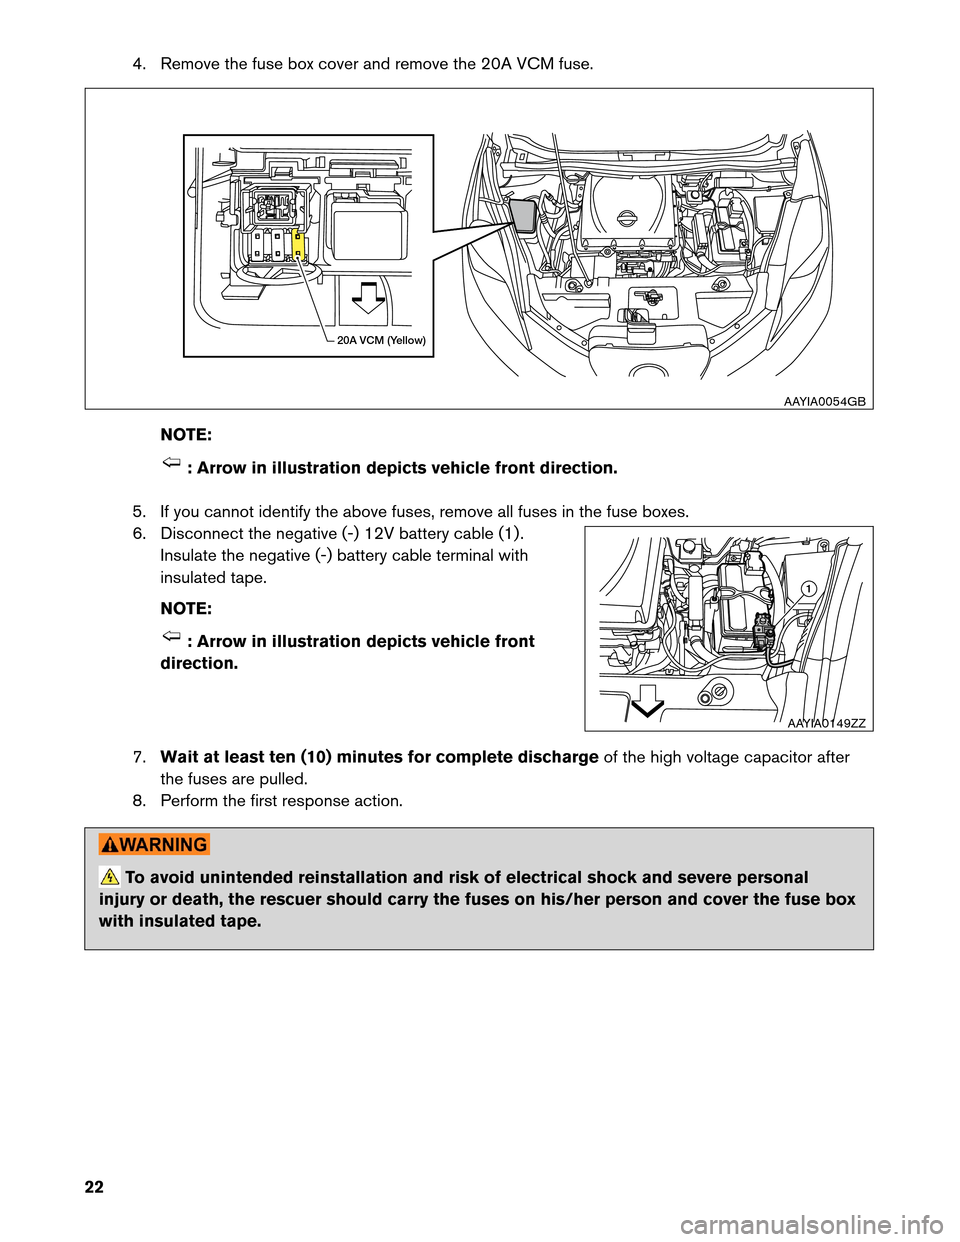 NISSAN LEAF 2013 1.G First Responders Guide 4. Remove the fuse box cover and remove the 20A VCM fuse.
NO TE: : Arrow in illustration depicts vehicle front direction.
5.

If you cannot identify the above fuses, remove all fuses in the fuse boxes